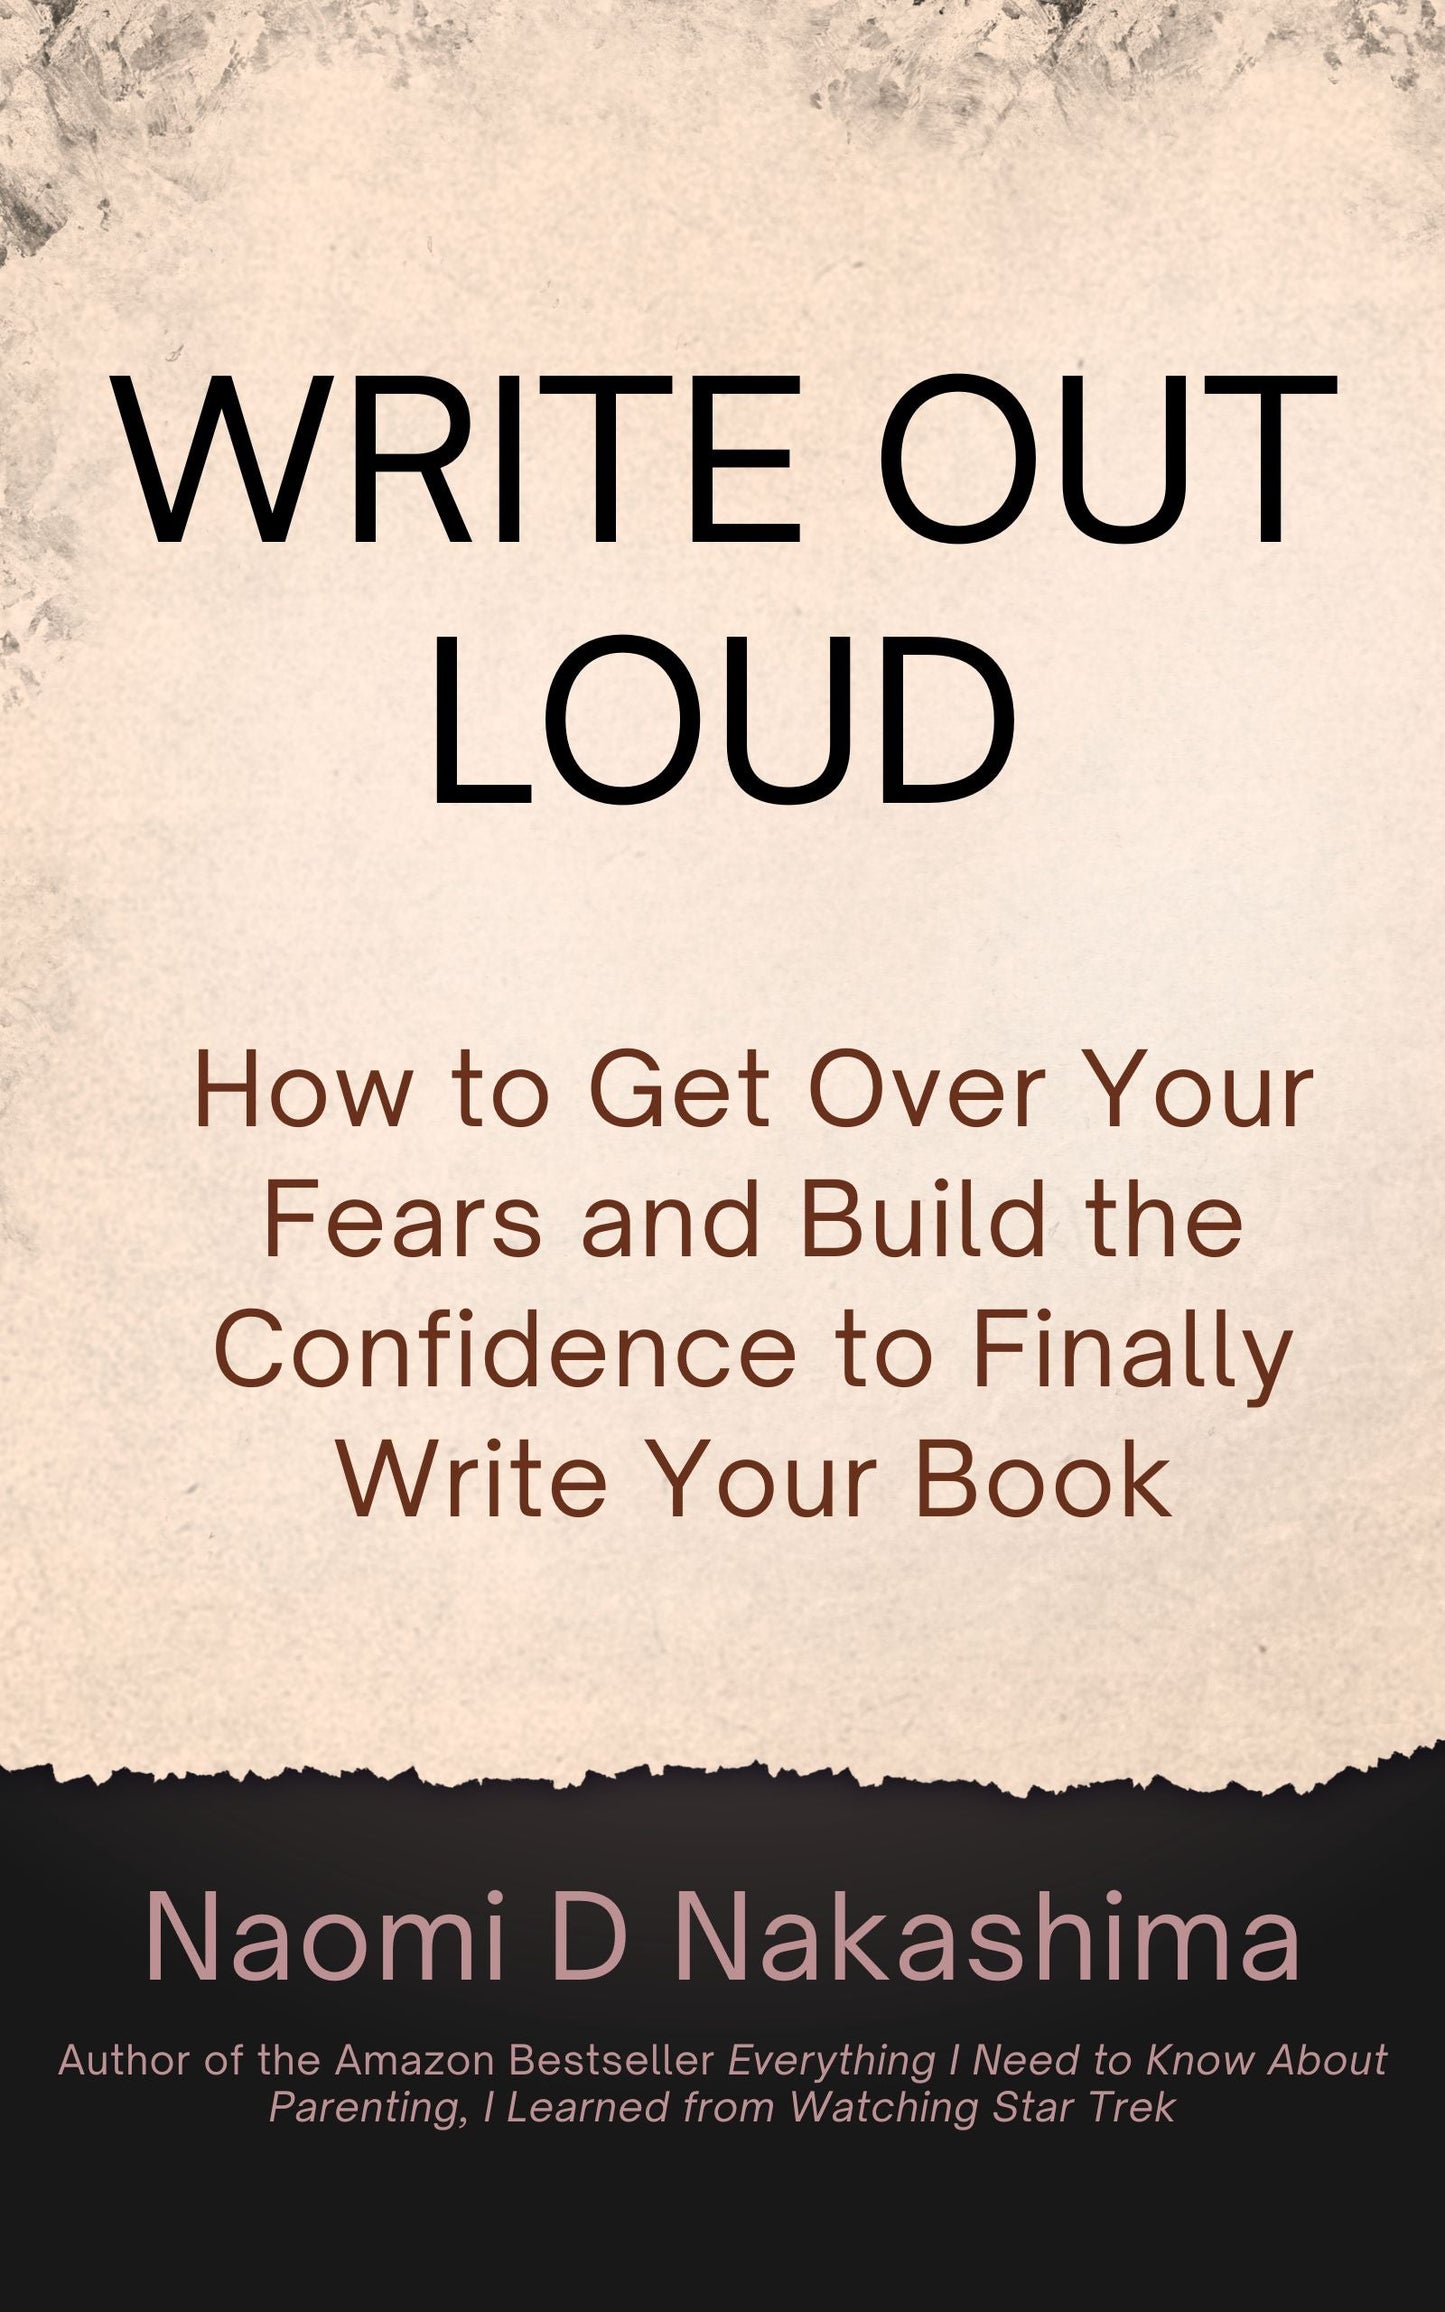 Write Out Loud - Autographed planner for writers and authors.